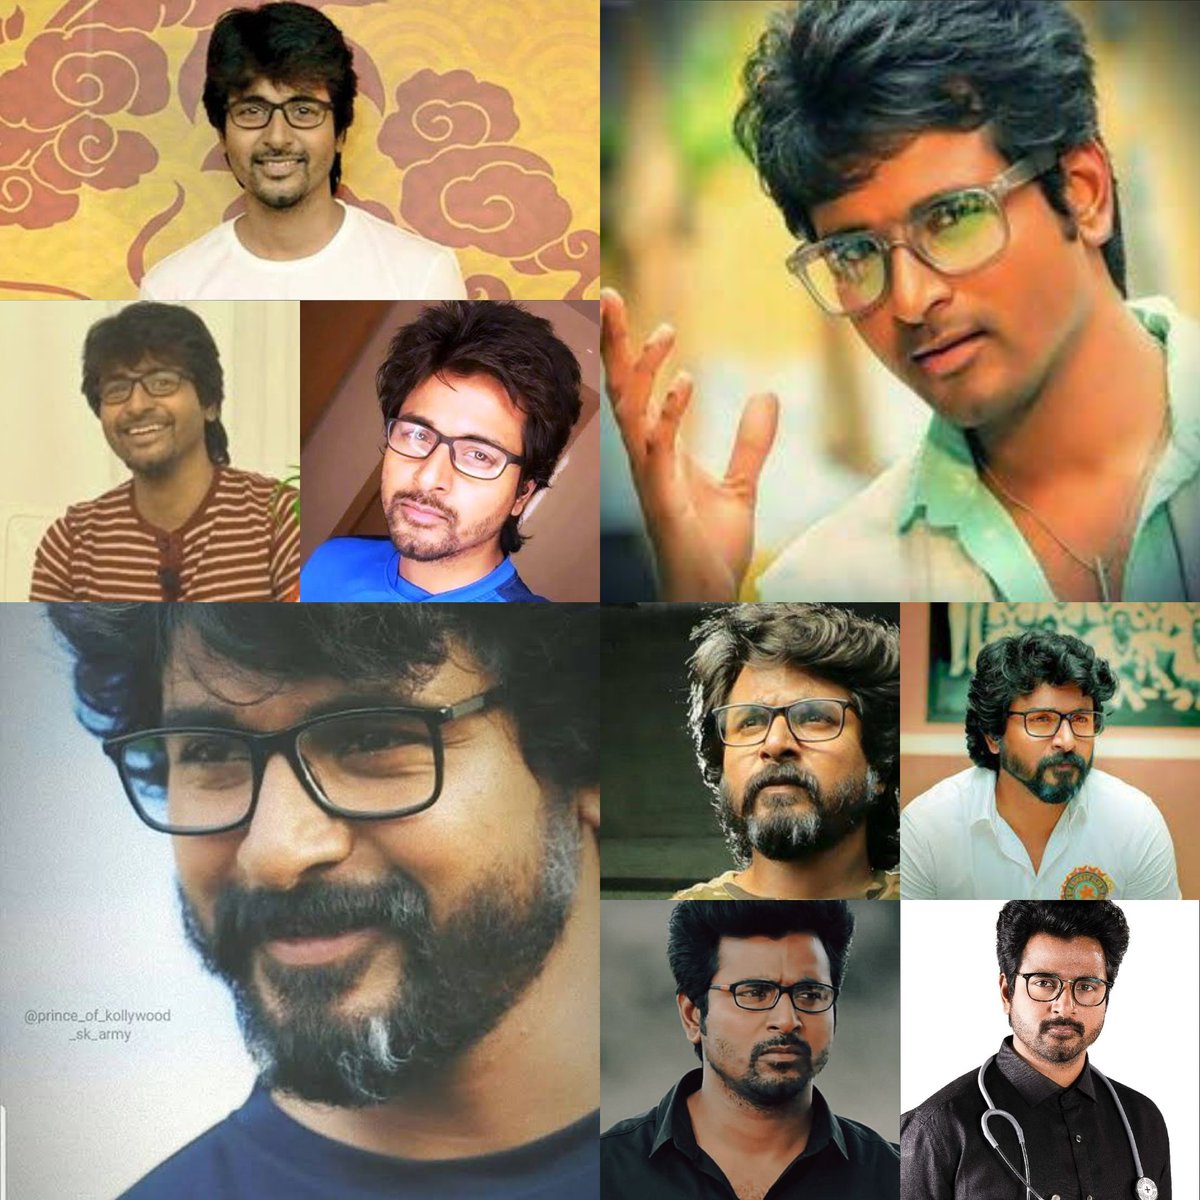   #SPECTacularSK Here the look of thalaivan with spects which adds extra cuteness & overflowing 